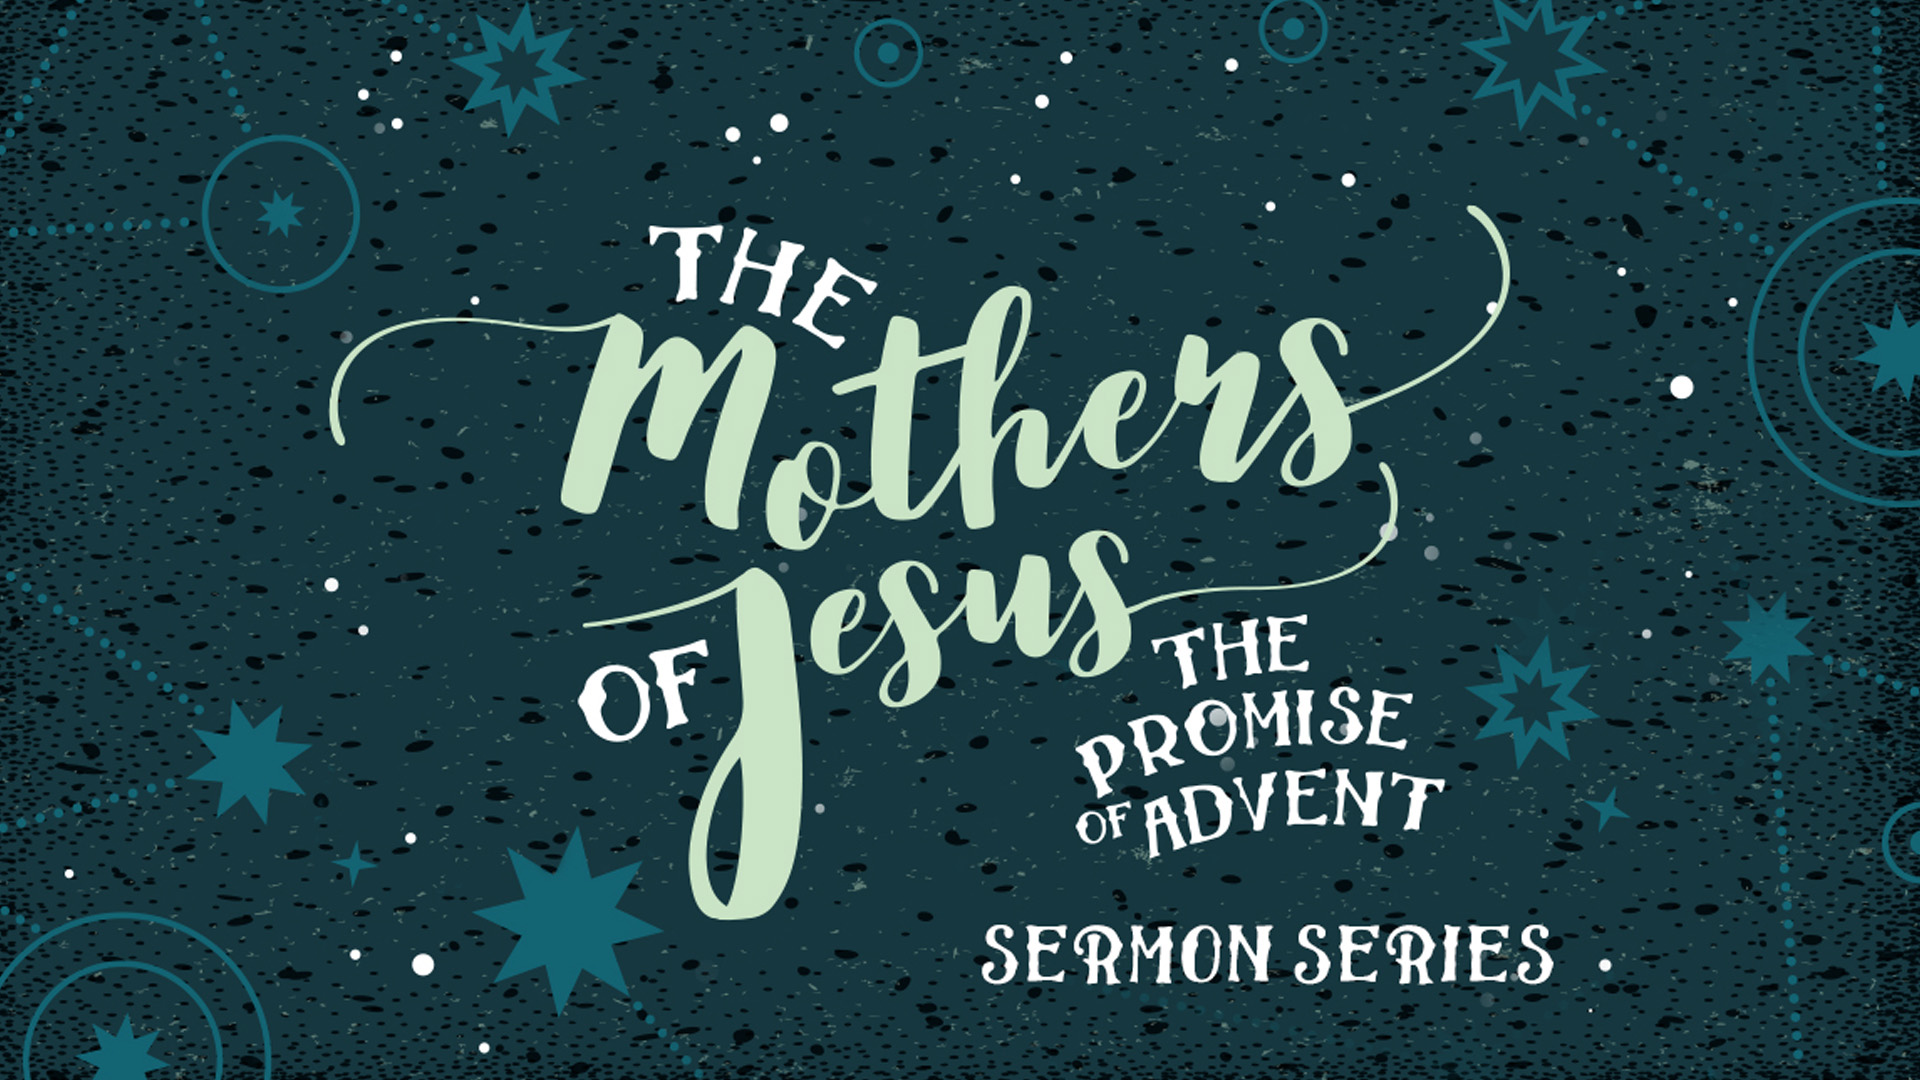 Mothers of Jesus graphic